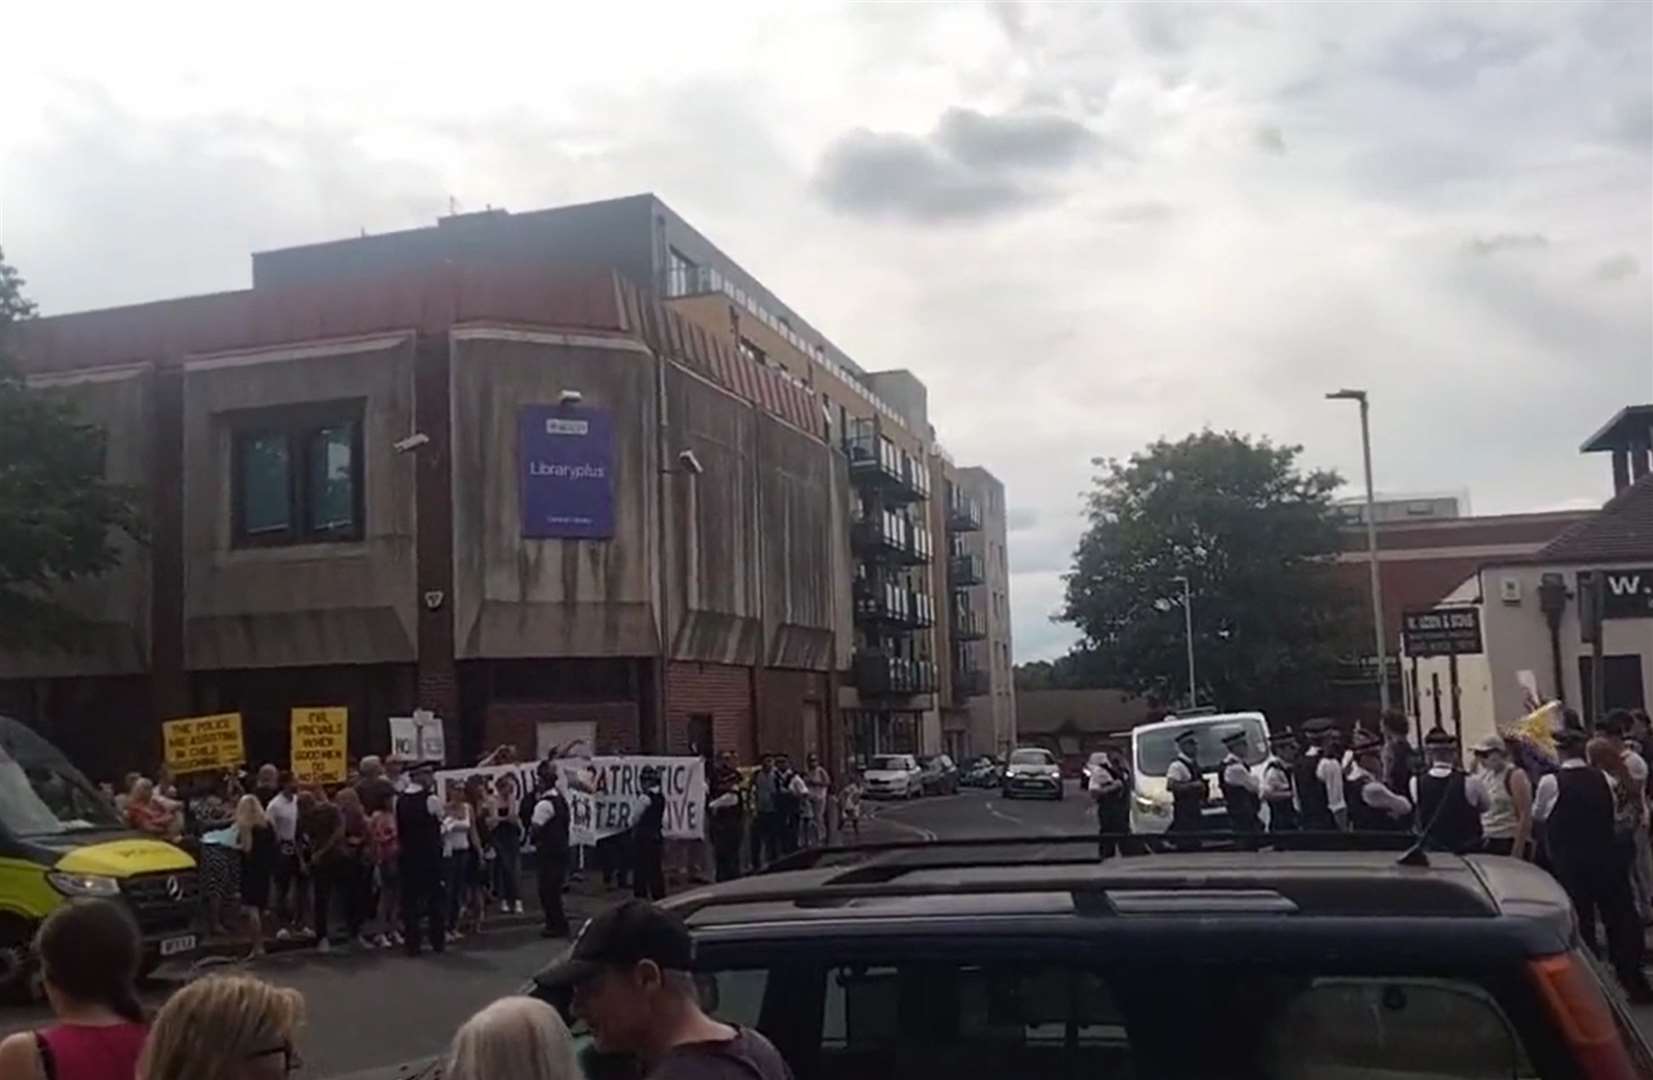 Far-right protest outside Bexleyheath library on Saturday, with a sizeable police presence at the scene. Picture: Sean Delaney